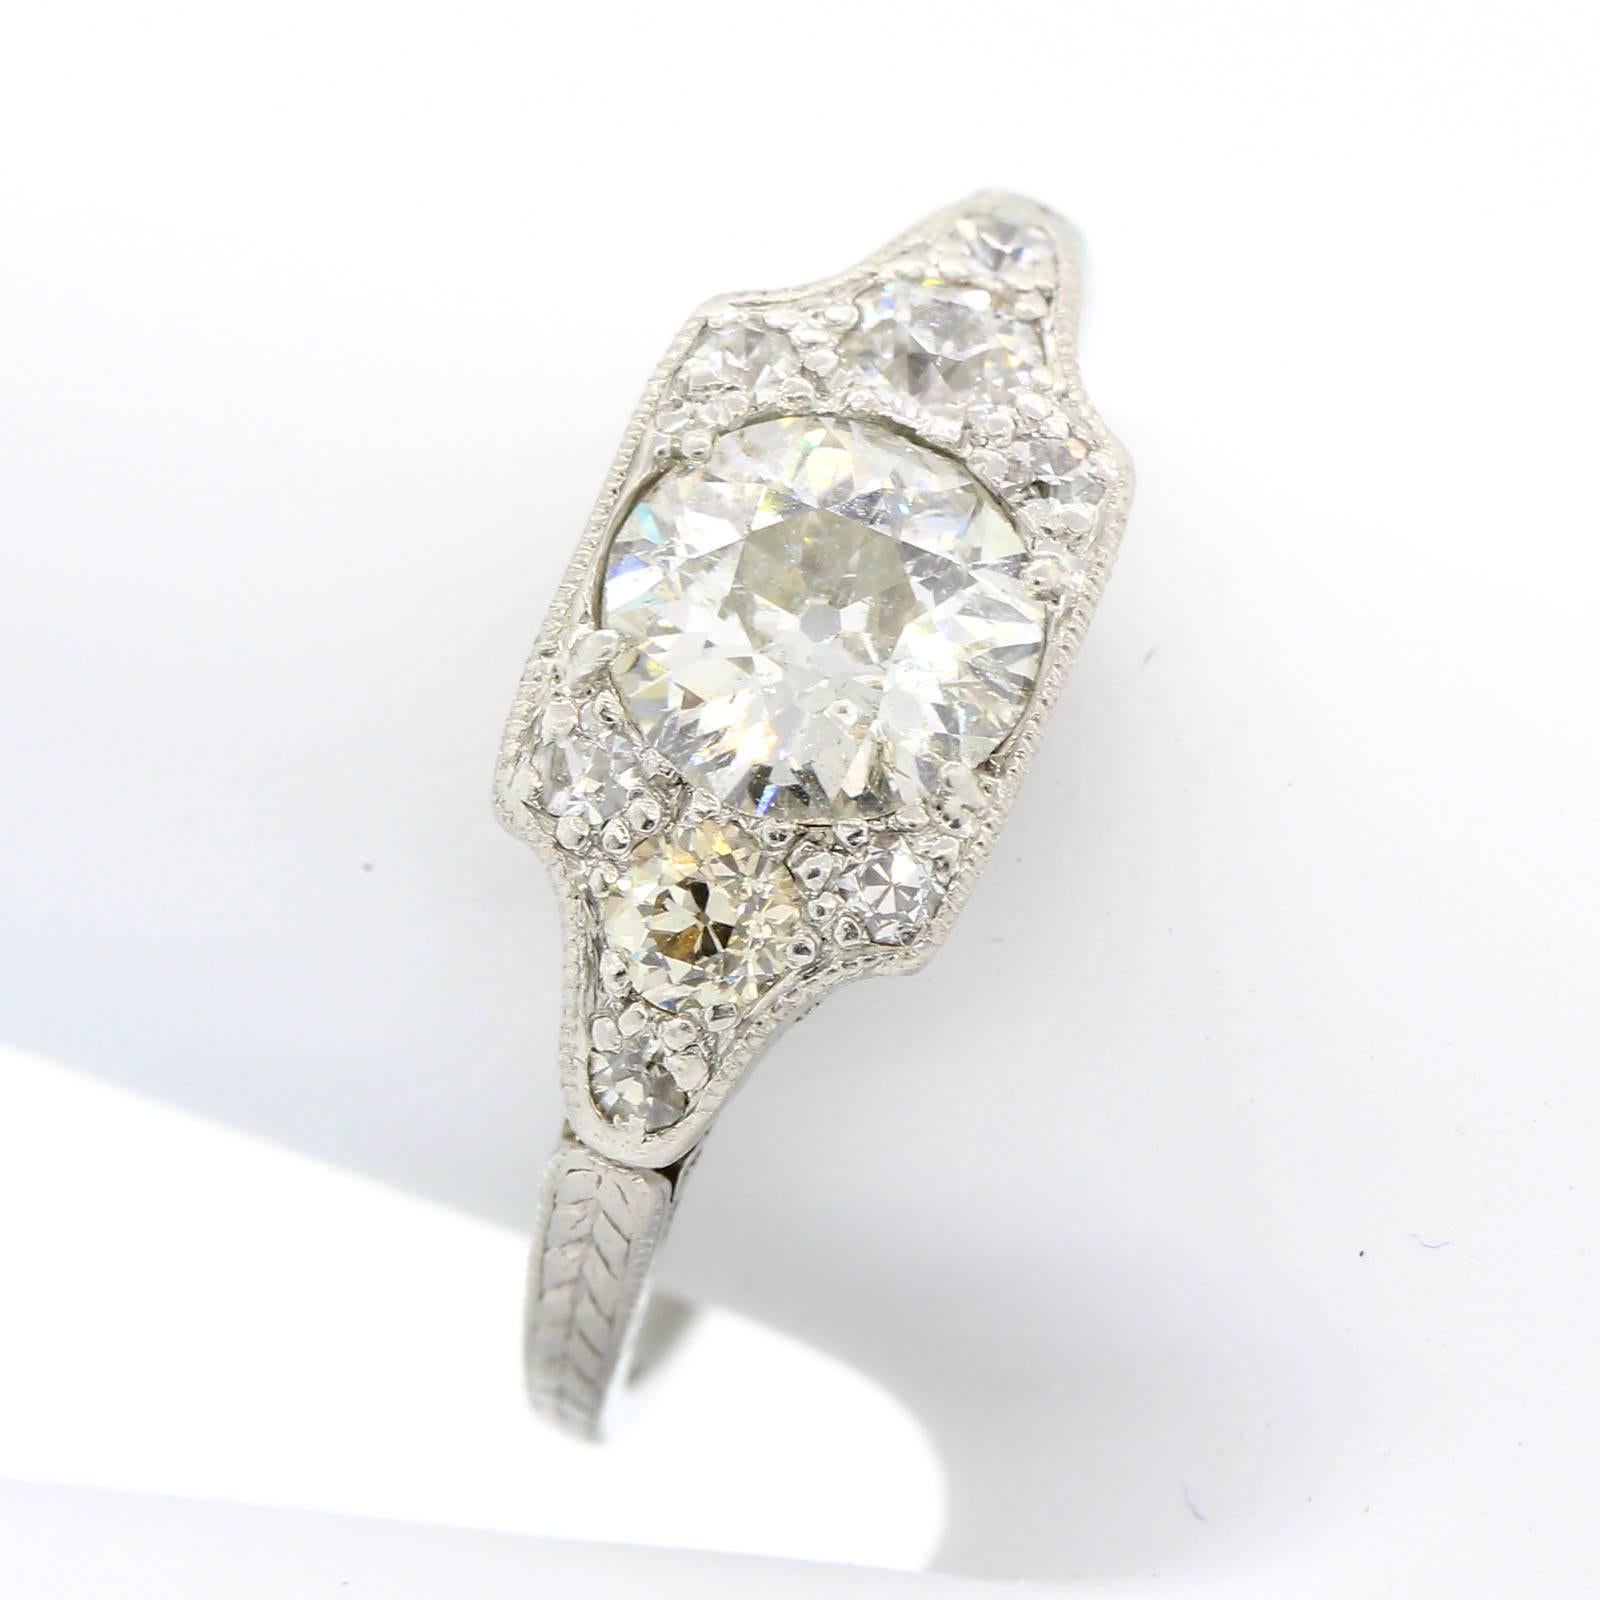 Coveted 1930's diamond and platinum ring.  The all engraved setting features a 0.93 carat Old European Cut Diamond of I/J color - SI3 clarity, flanked by two Old European Cut Diamonds.  Accenting the ring are six old Single Cut Diamonds.  All